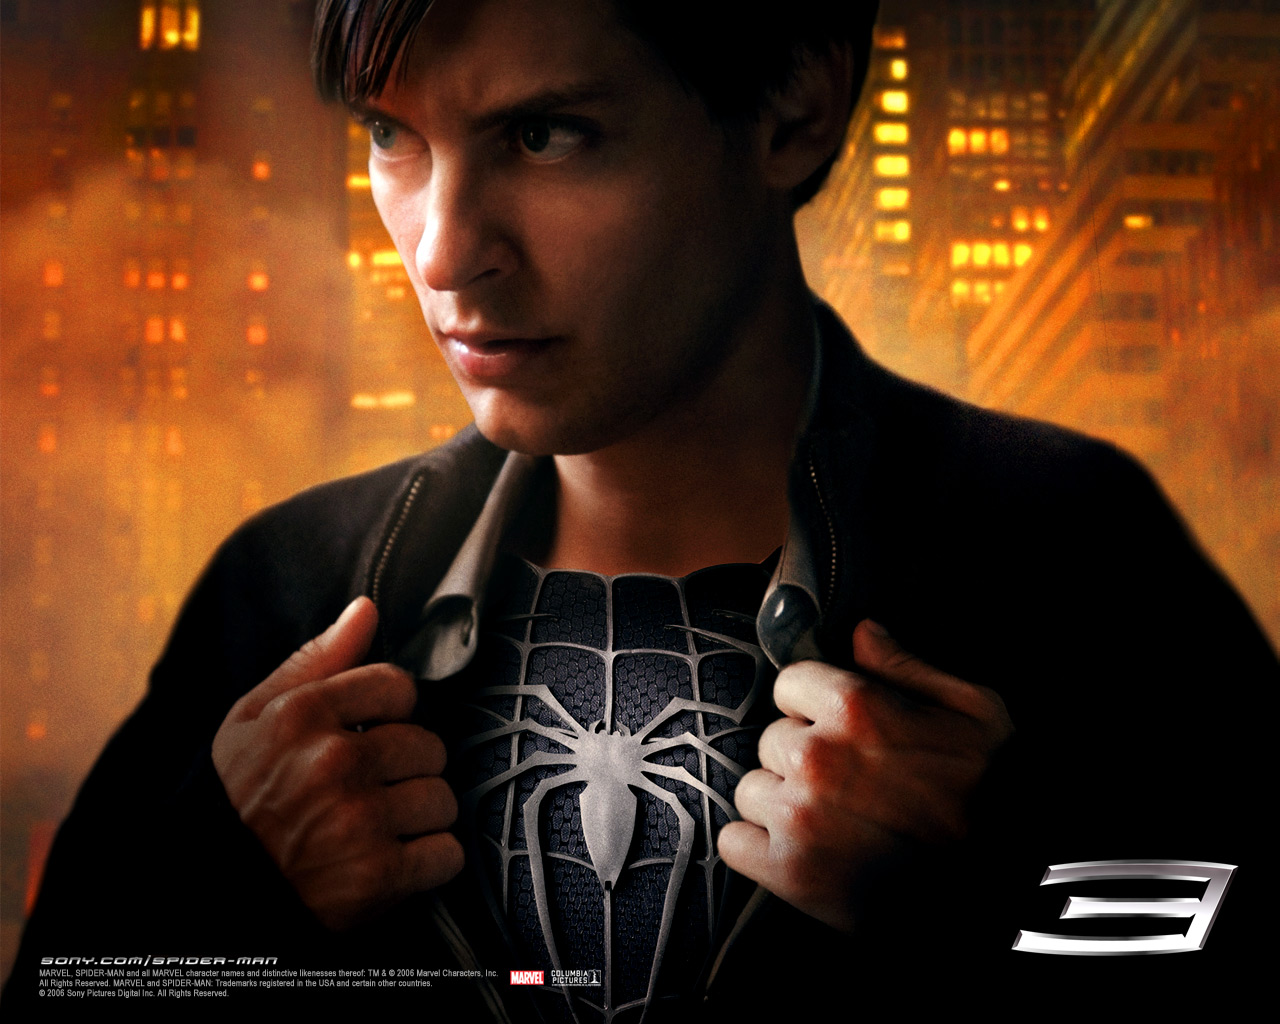 Tobey Maguire - Tobey Maguire in Spider Man 3 Wallpaper 2 800x600